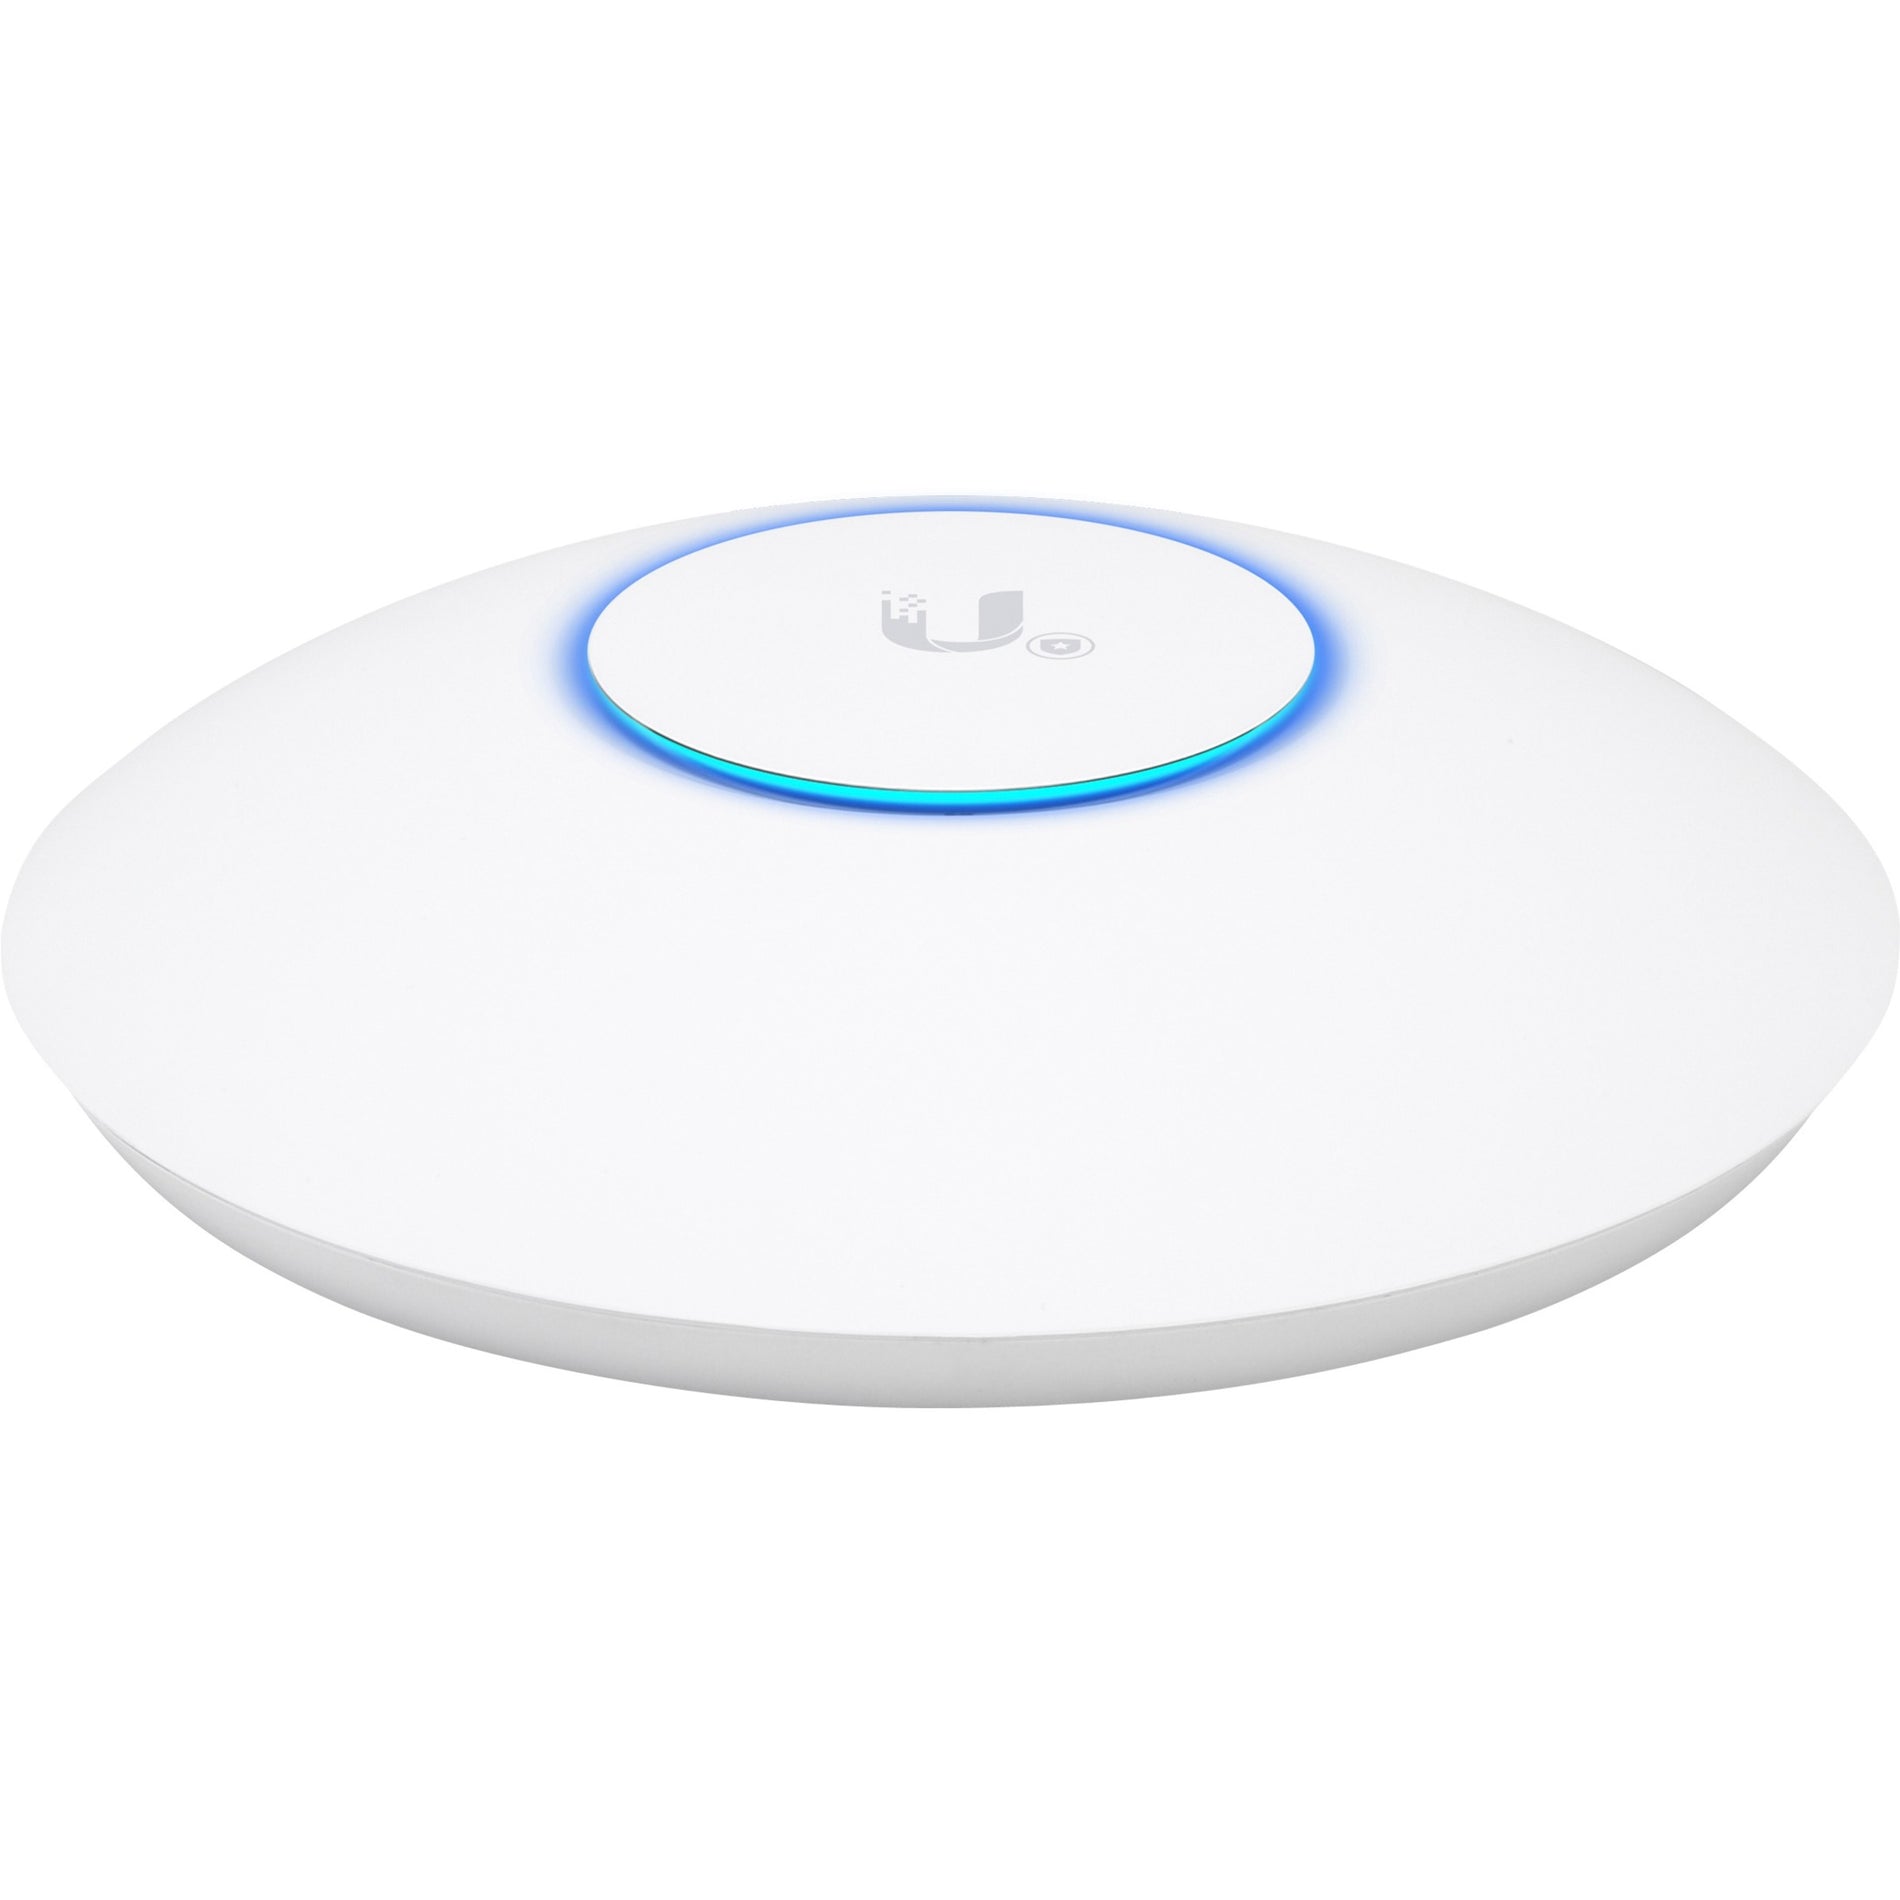 Ubiquiti UAP-AC-SHD-5-US UniFi Wave2 AC AP Security & BLE, 802.11ac Wave 2 Access Point with Dedicated Security Radio